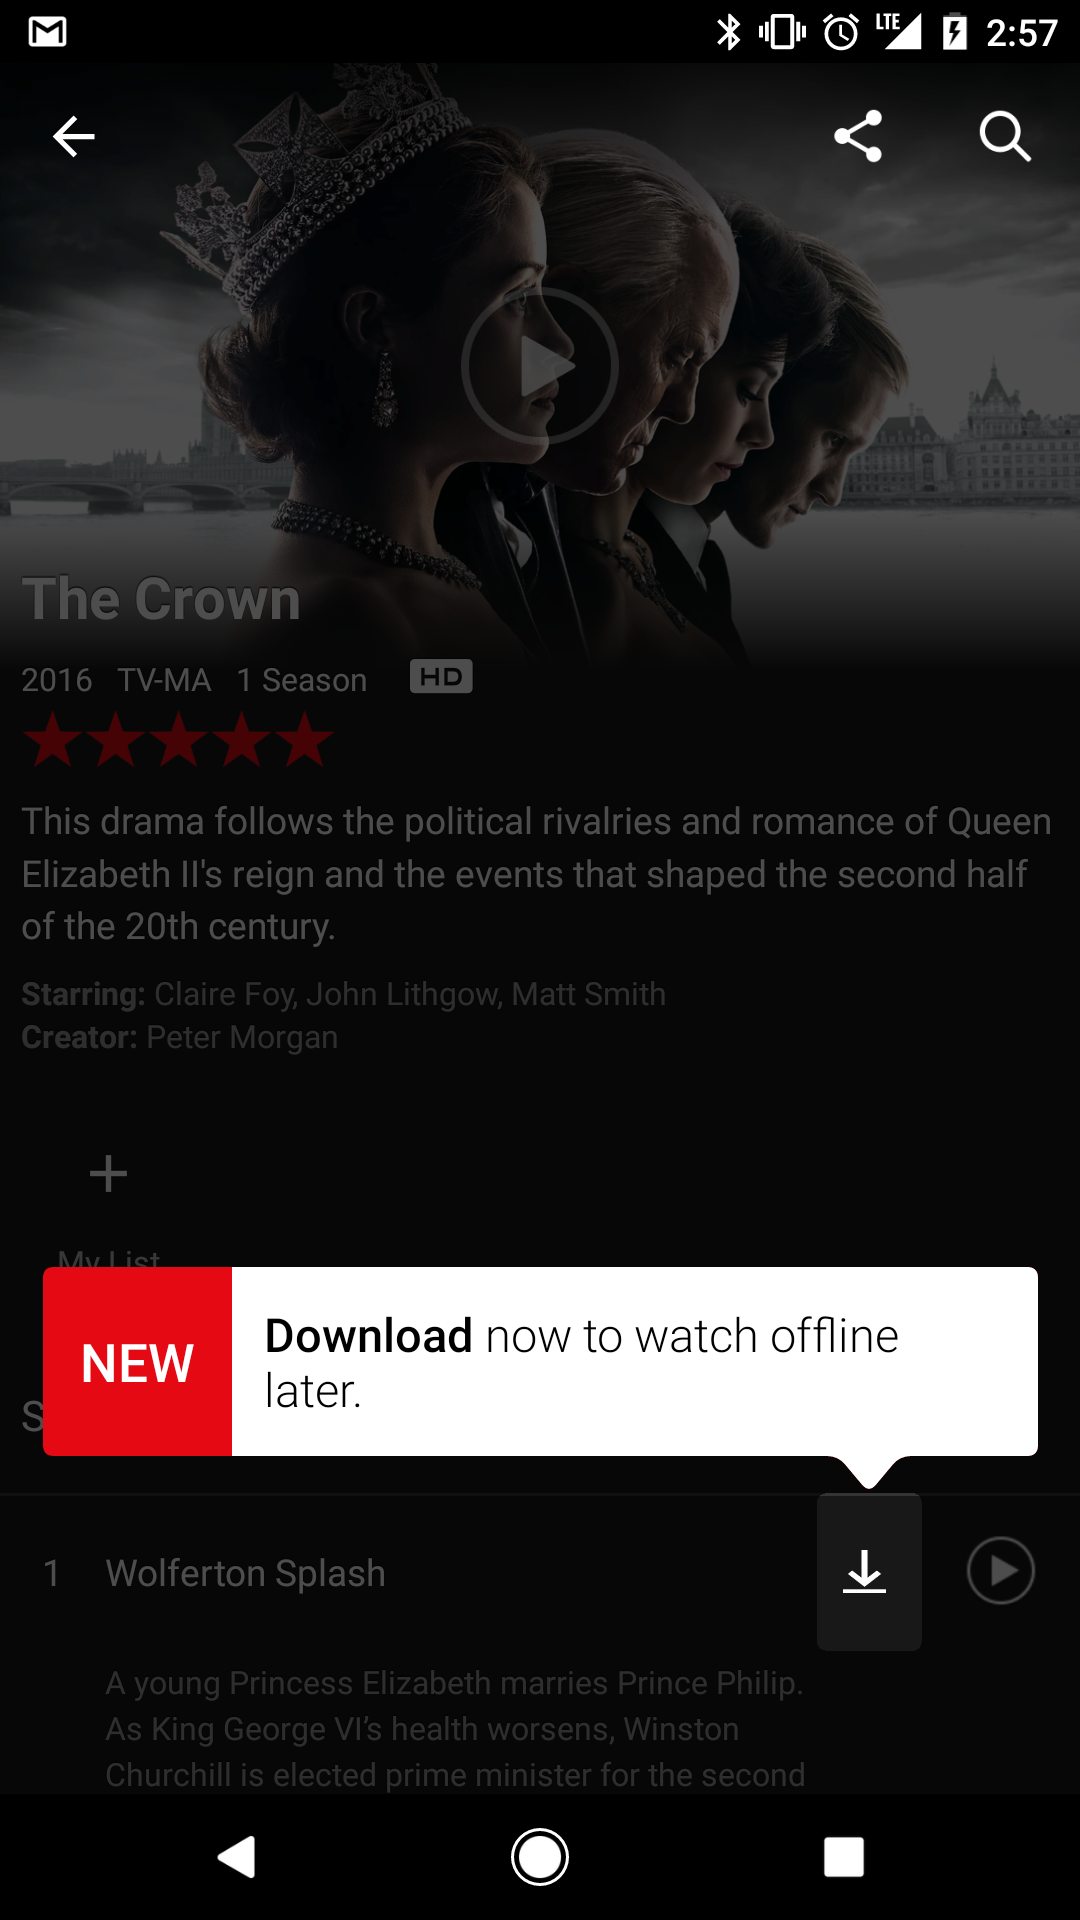 downloading - Netflix now has offline playback and the ability to download movies and shows